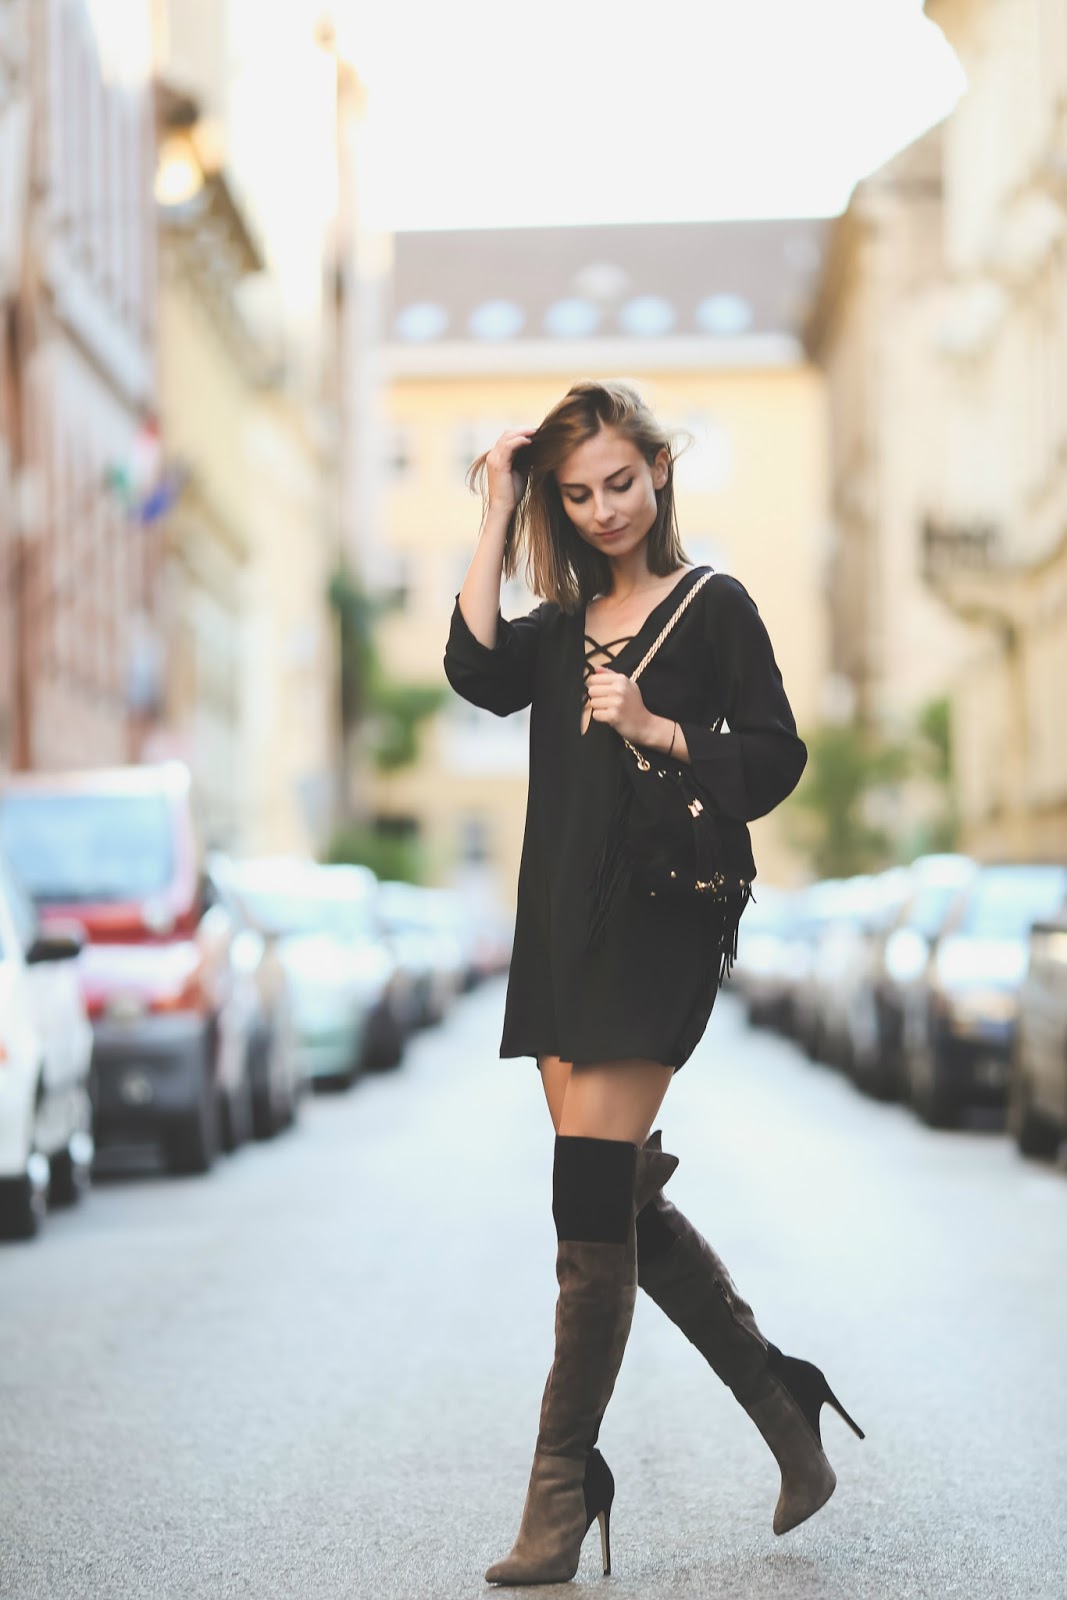 WEARING A LACE UP DRESS AND BOOTS | What Vero Wears